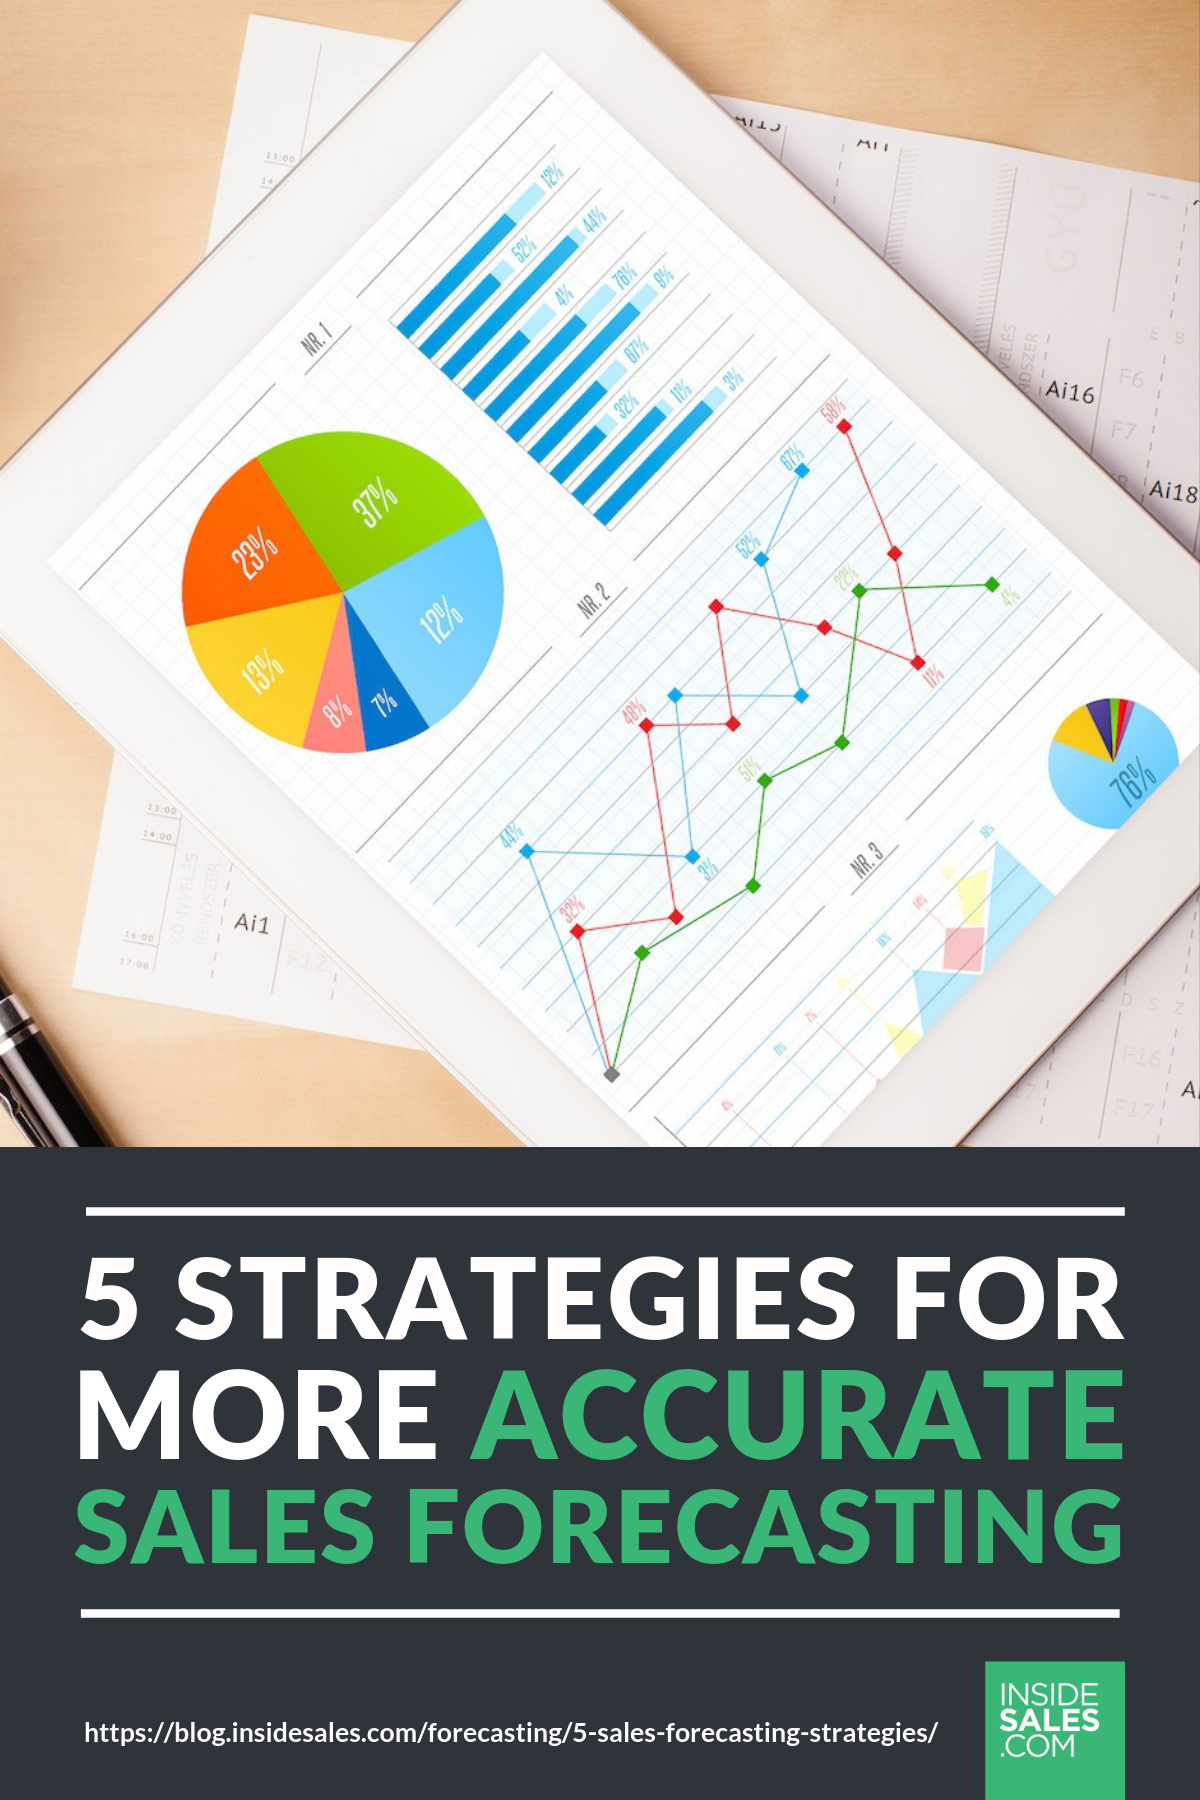 5 Strategies For More Accurate Sales Forecasting https://resources.insidesales.com/blog/forecasting/5-sales-forecasting-strategies/